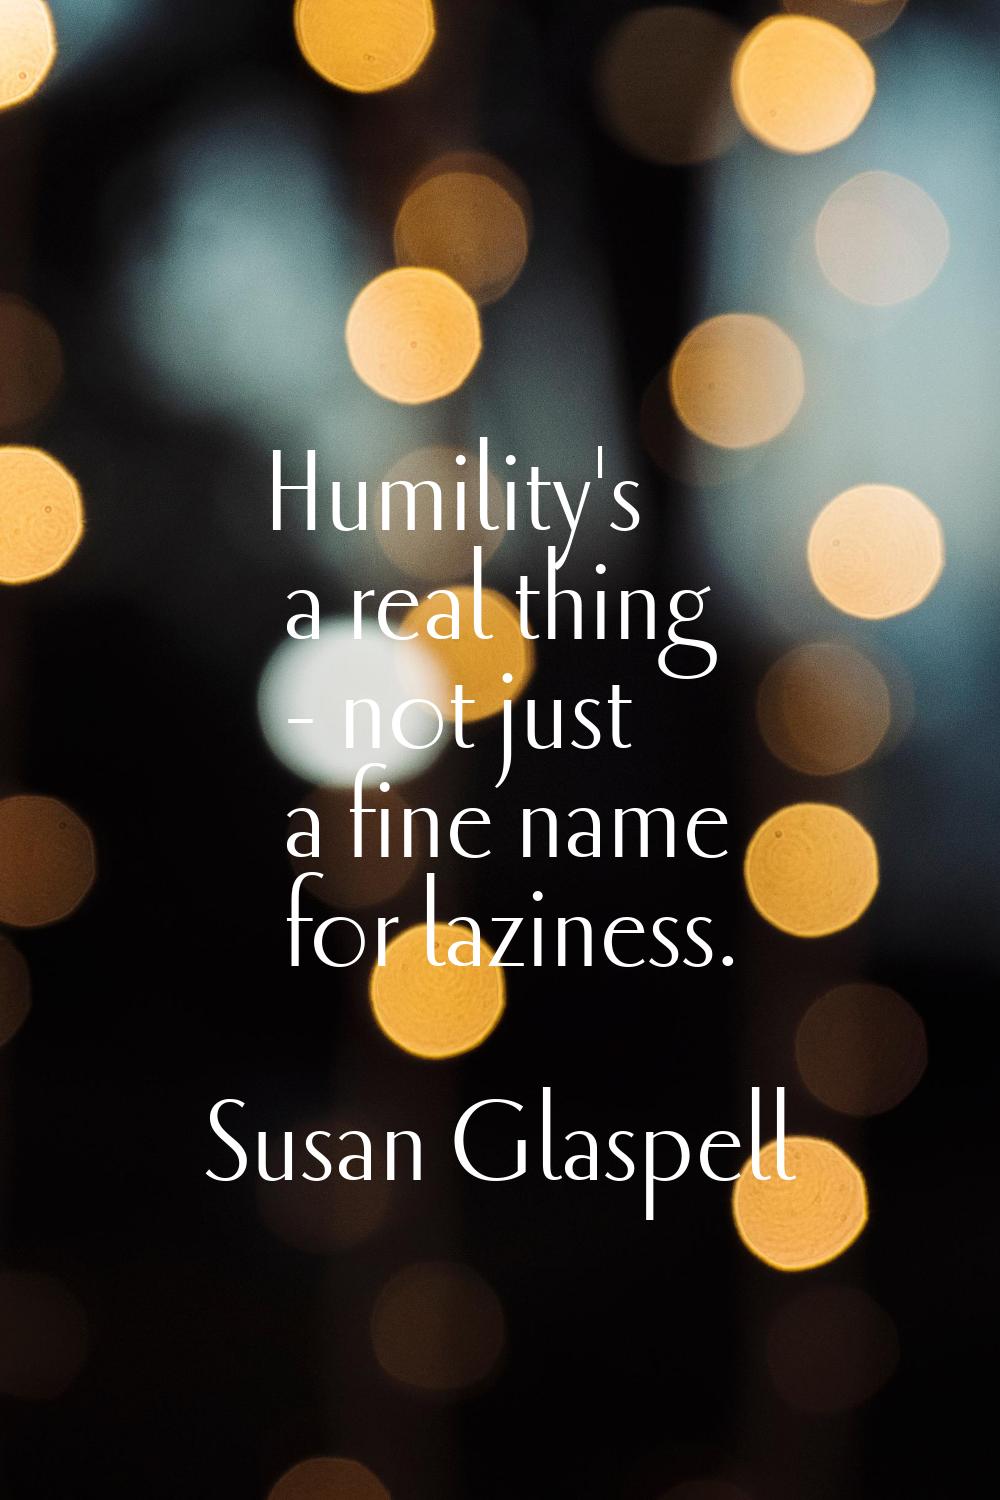 Humility's a real thing - not just a fine name for laziness.